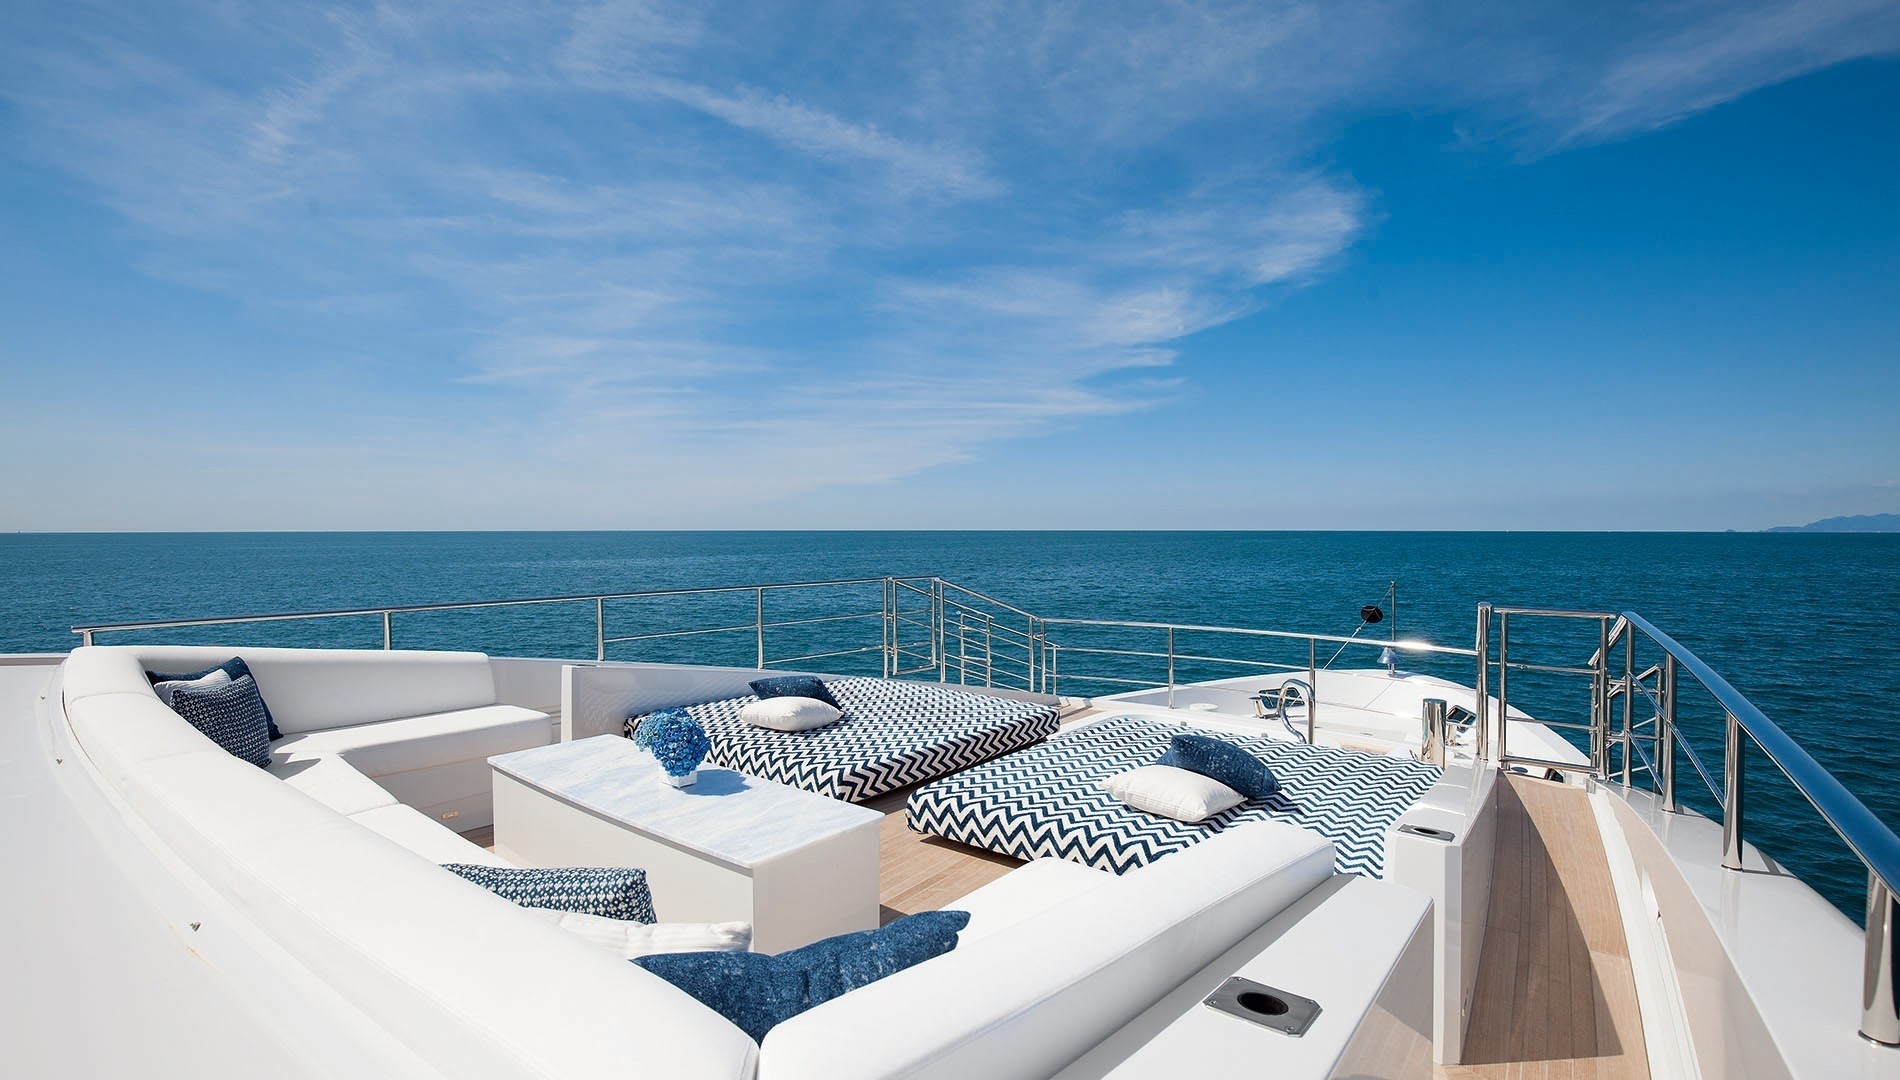 Benetti Veloce 140 foredeck sunpads and jacuzzi